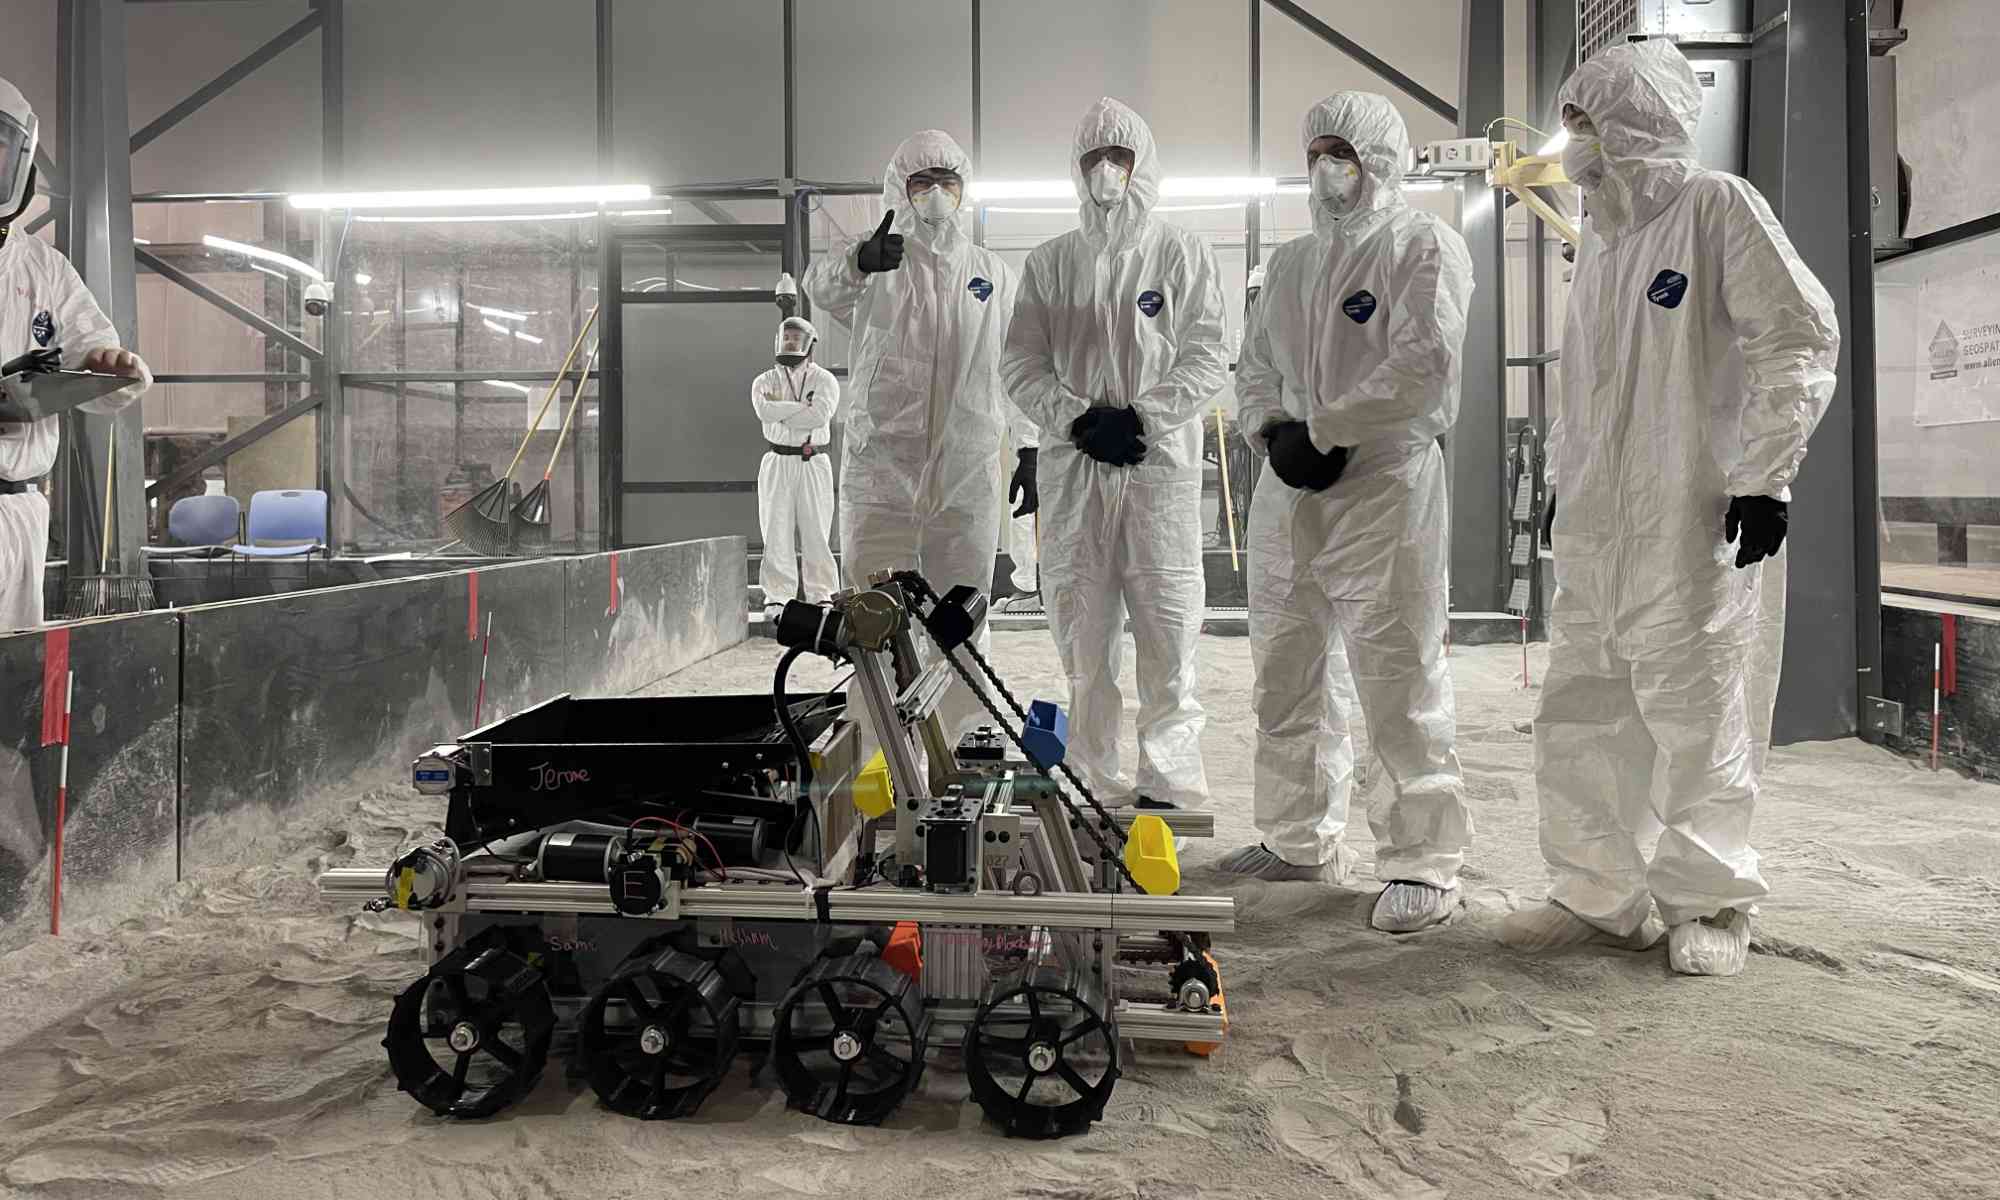 Four students in protective white gear pose with their lunar rover robot in a simulation area resembling the moon's terrain.